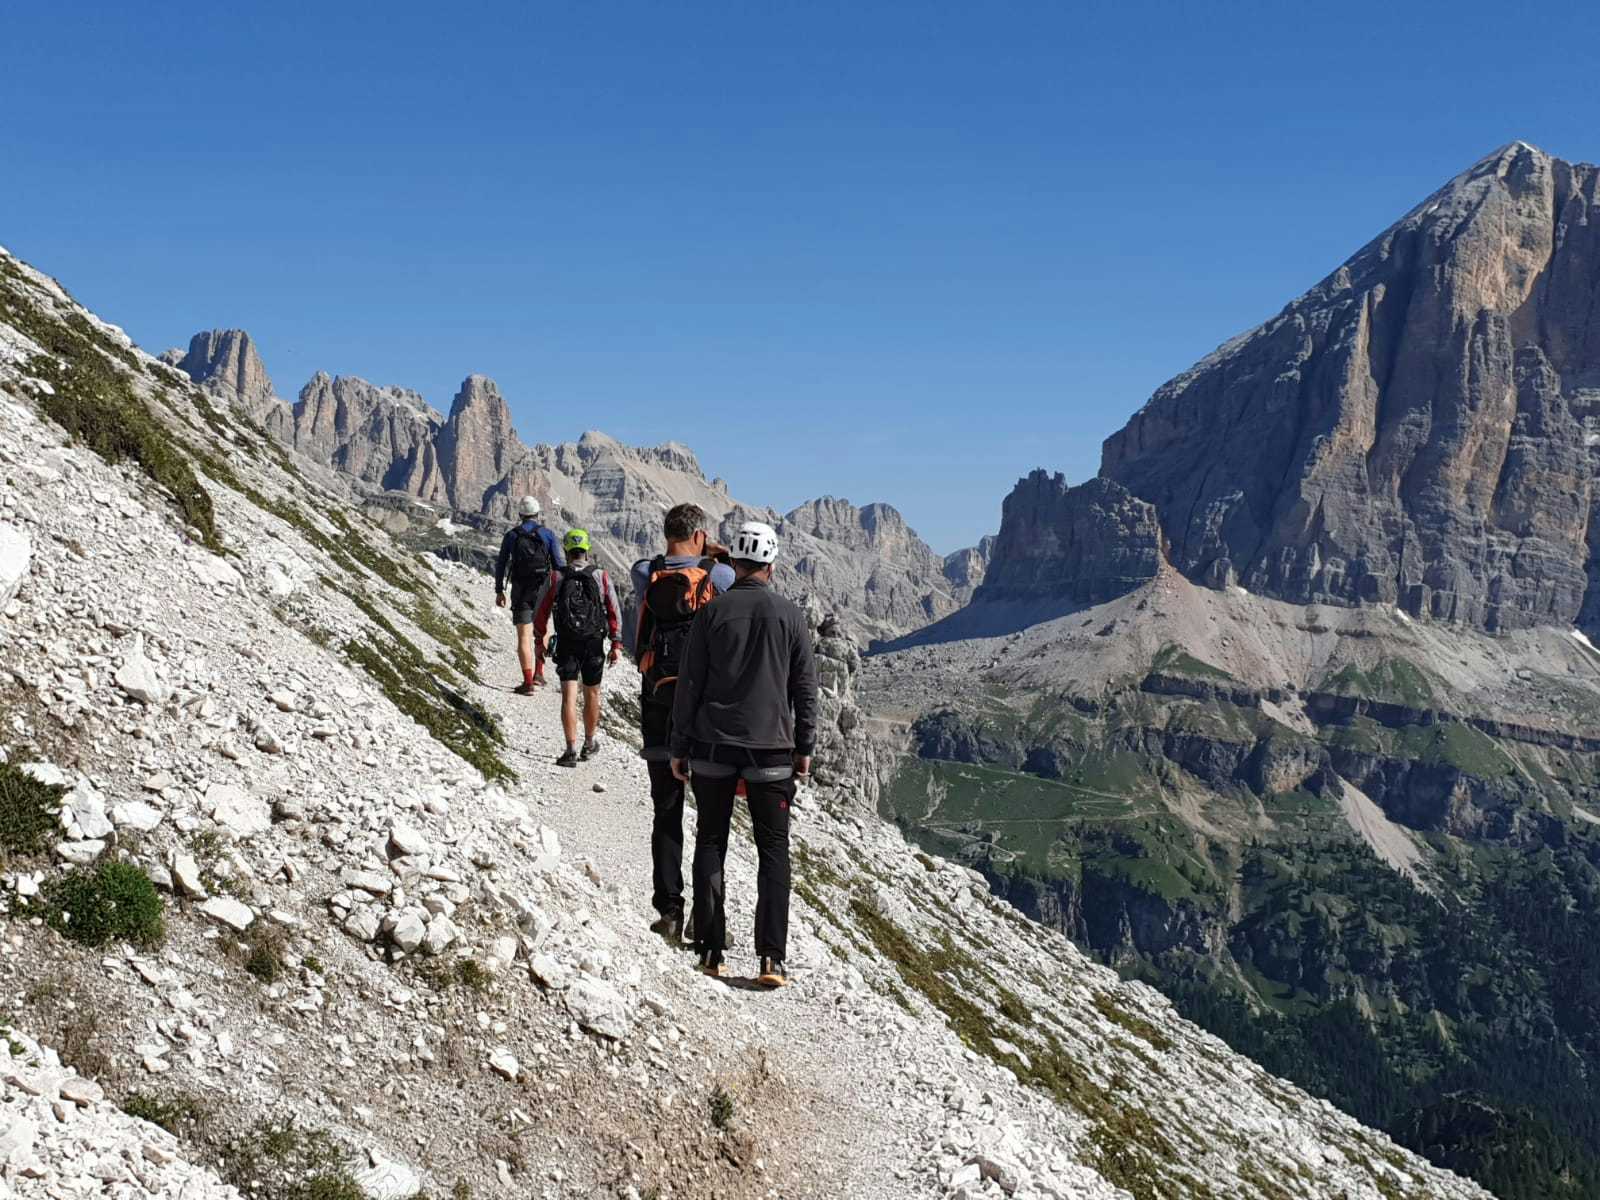 Climbing a Via Ferrata, a Must-Do Experience in the Dolomites